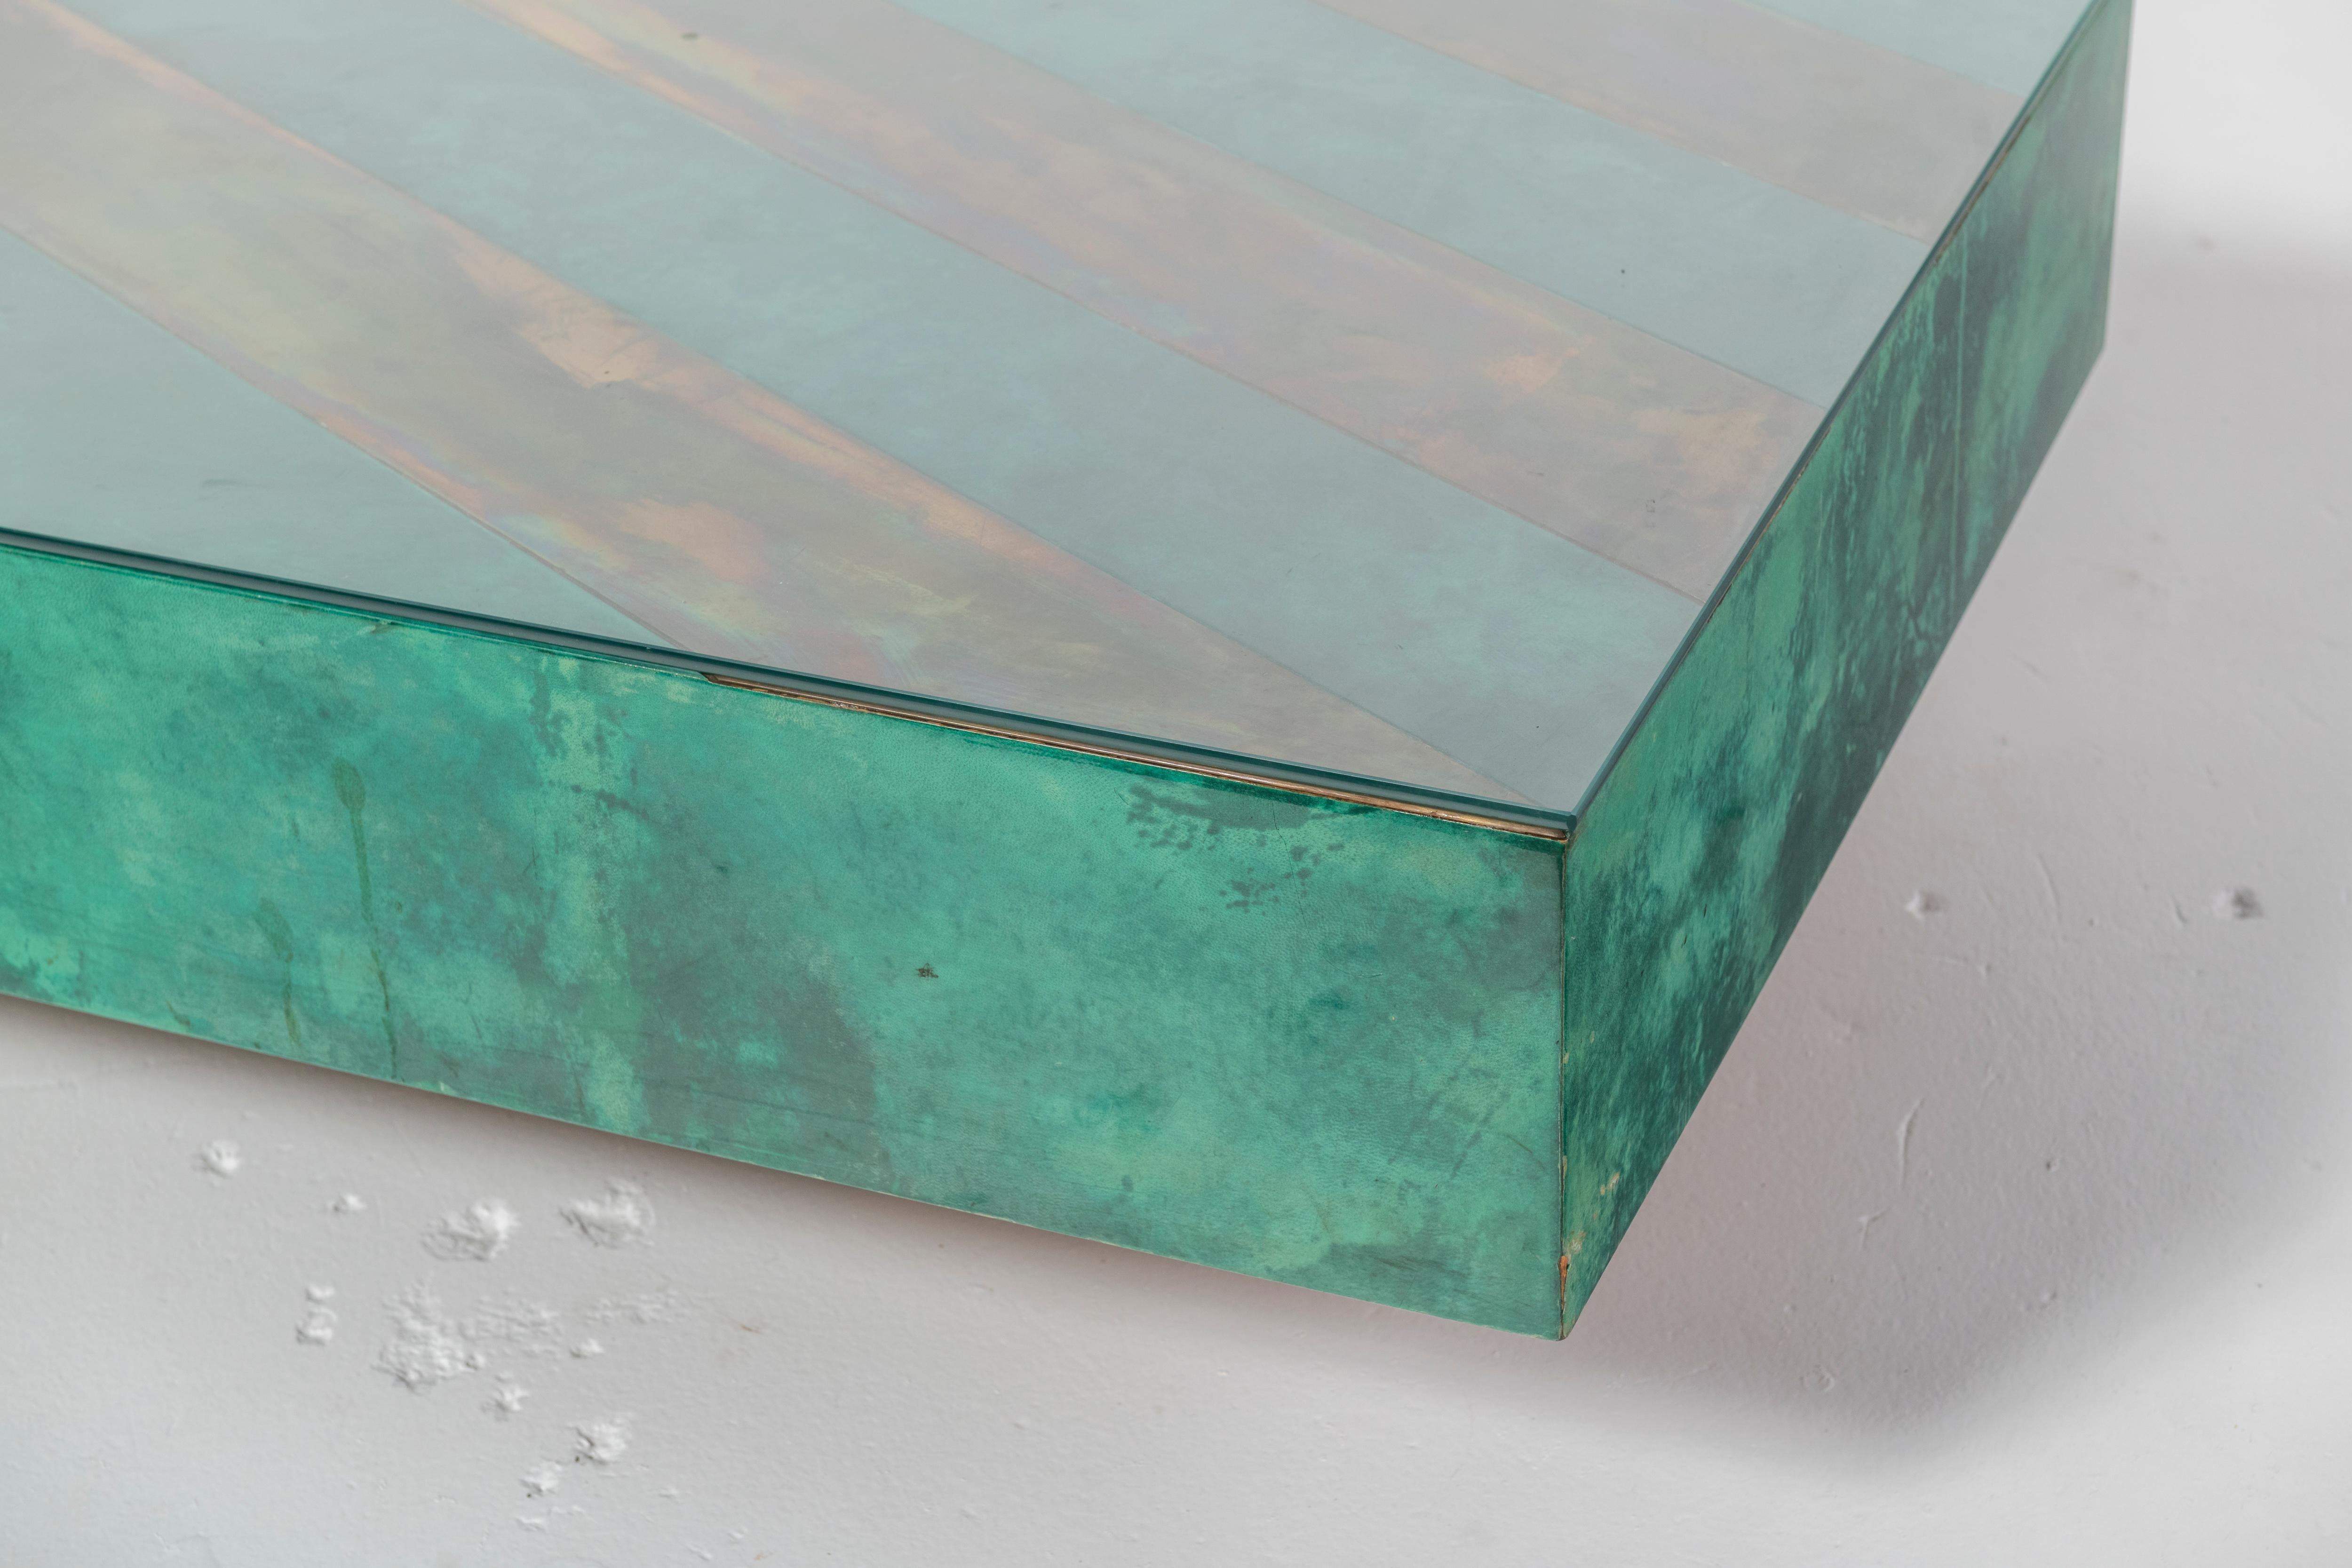 This is an unusual Aldo Tura large rectangular coffee cocktail table in emerald green parchment with diagonal brass inlay. The top is lacquered for beauty and preservation. 

Aldo Tura's timeless, modern design ensures many years of enjoyment.